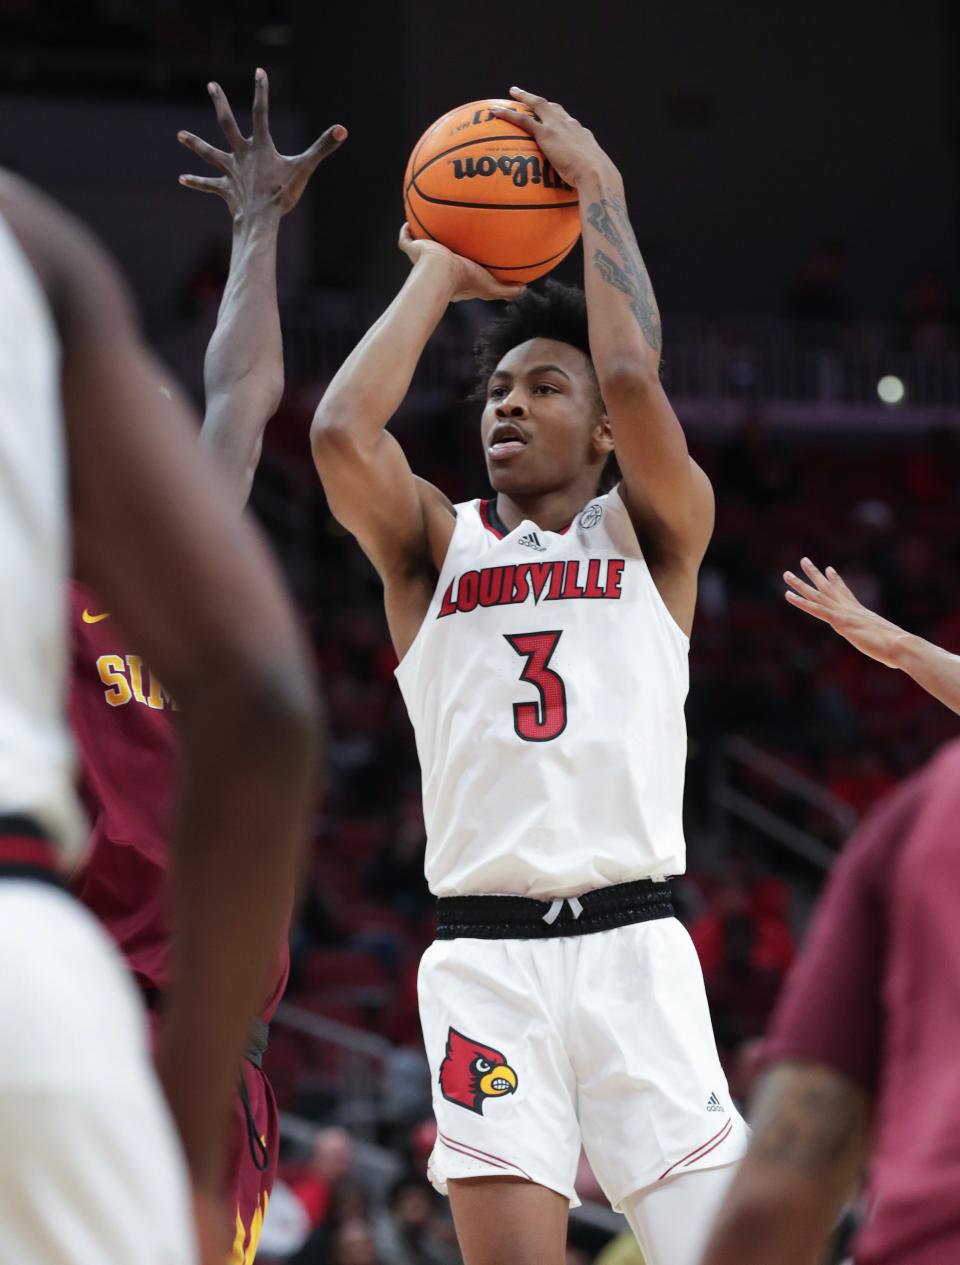 U of L's Koron Davis shoots against Simmons College defenders during an exhibition game Oct. 18 at the KFC Yum! Center.